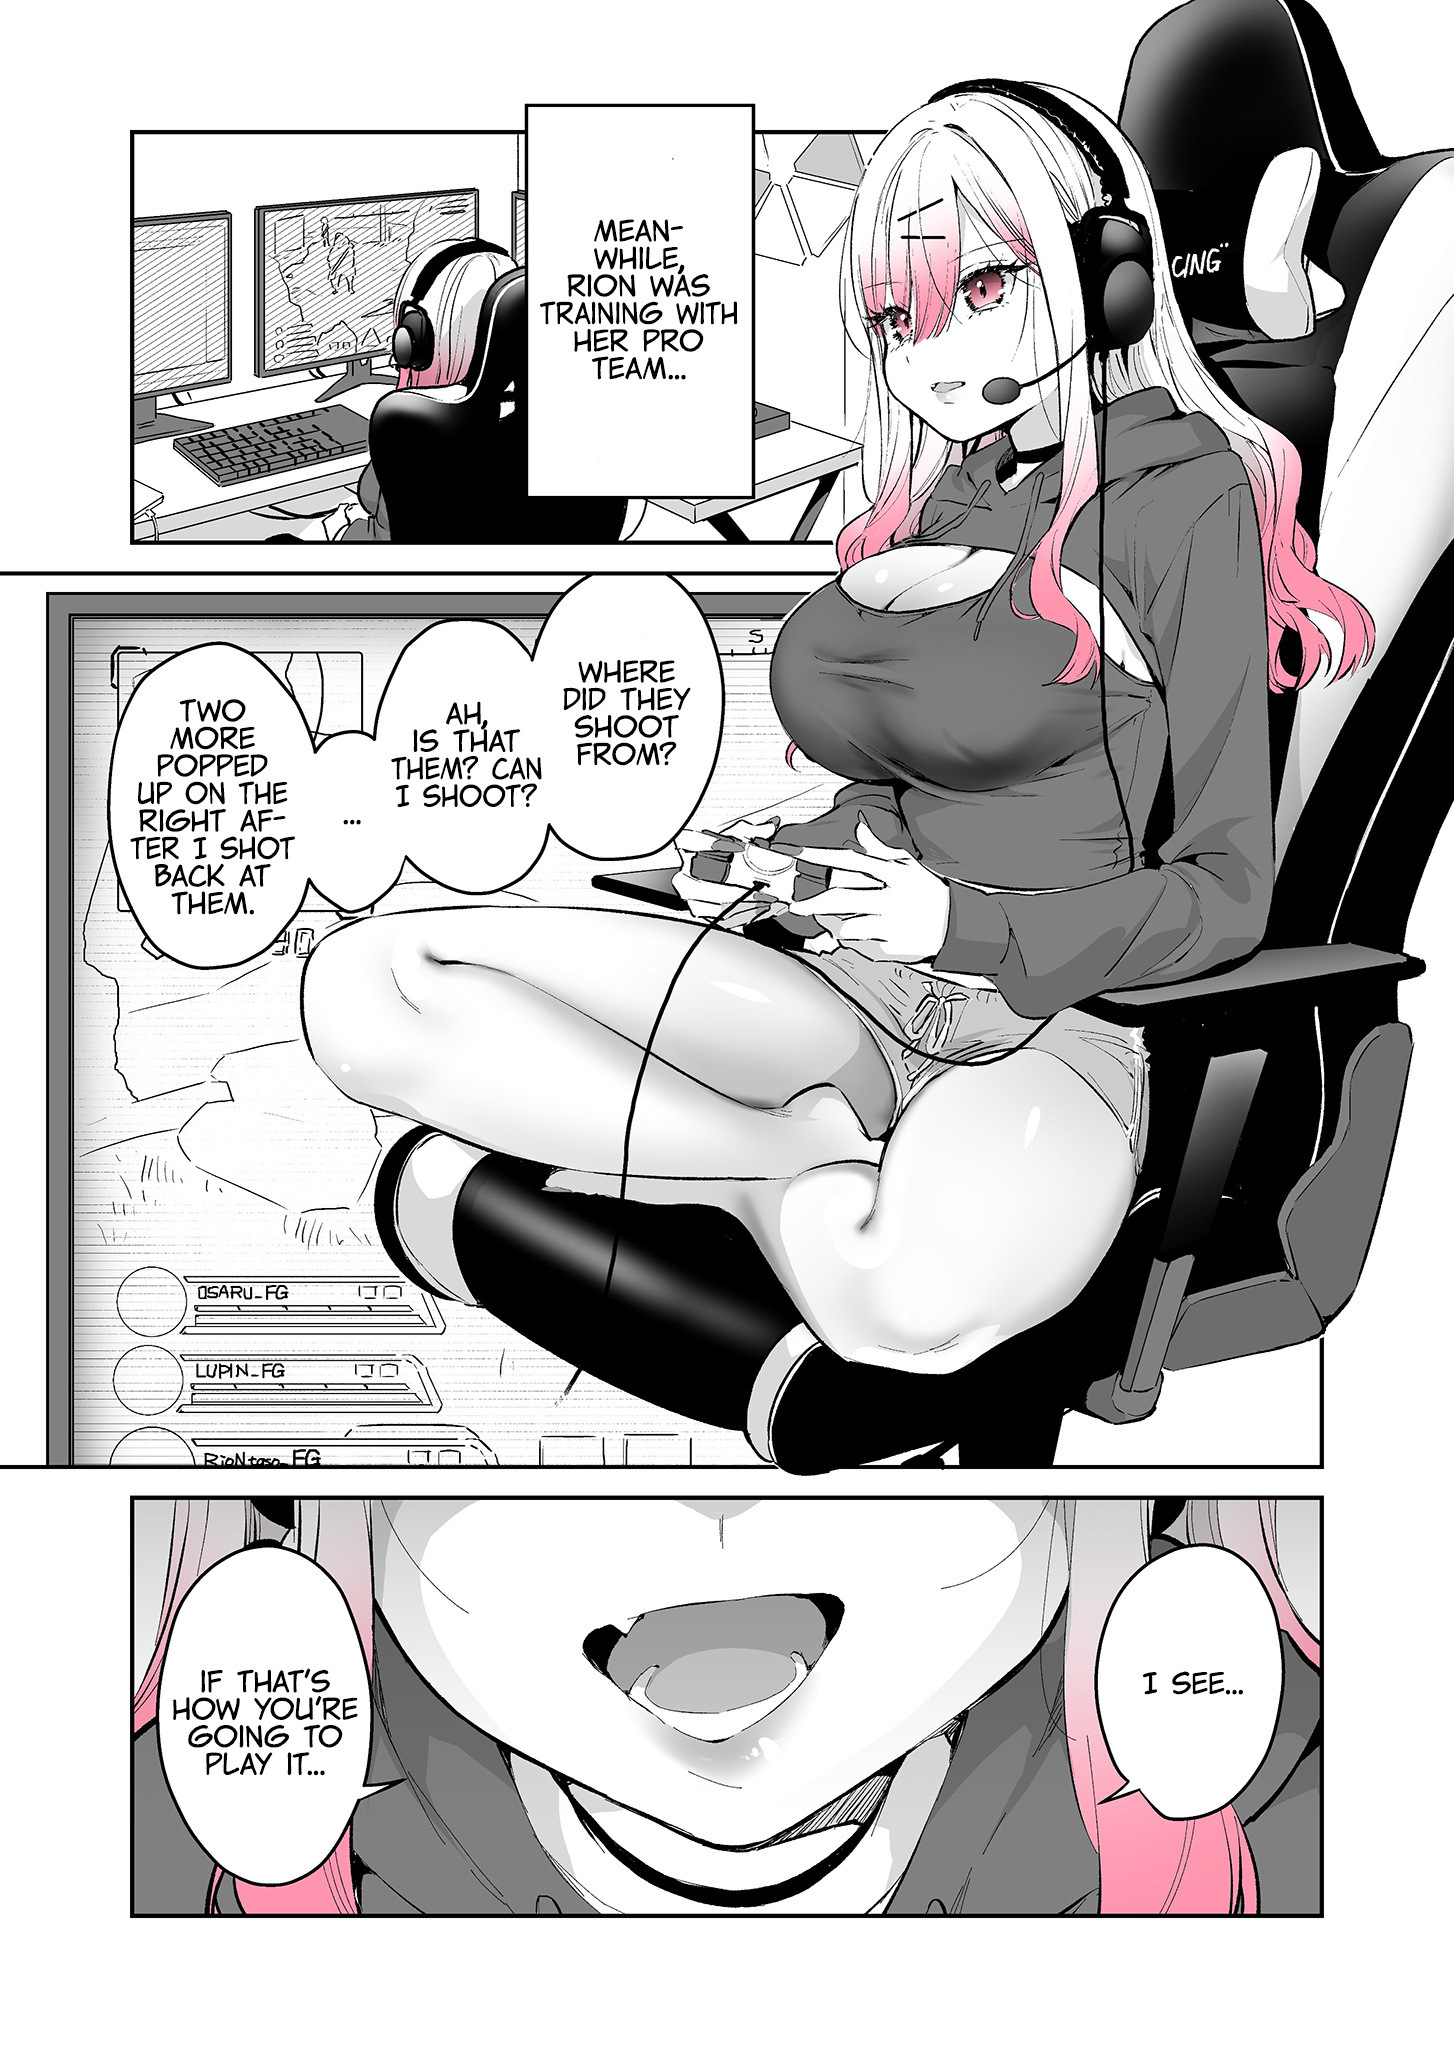 I Want To Be Praised By A Gal Gamer! - Page 1